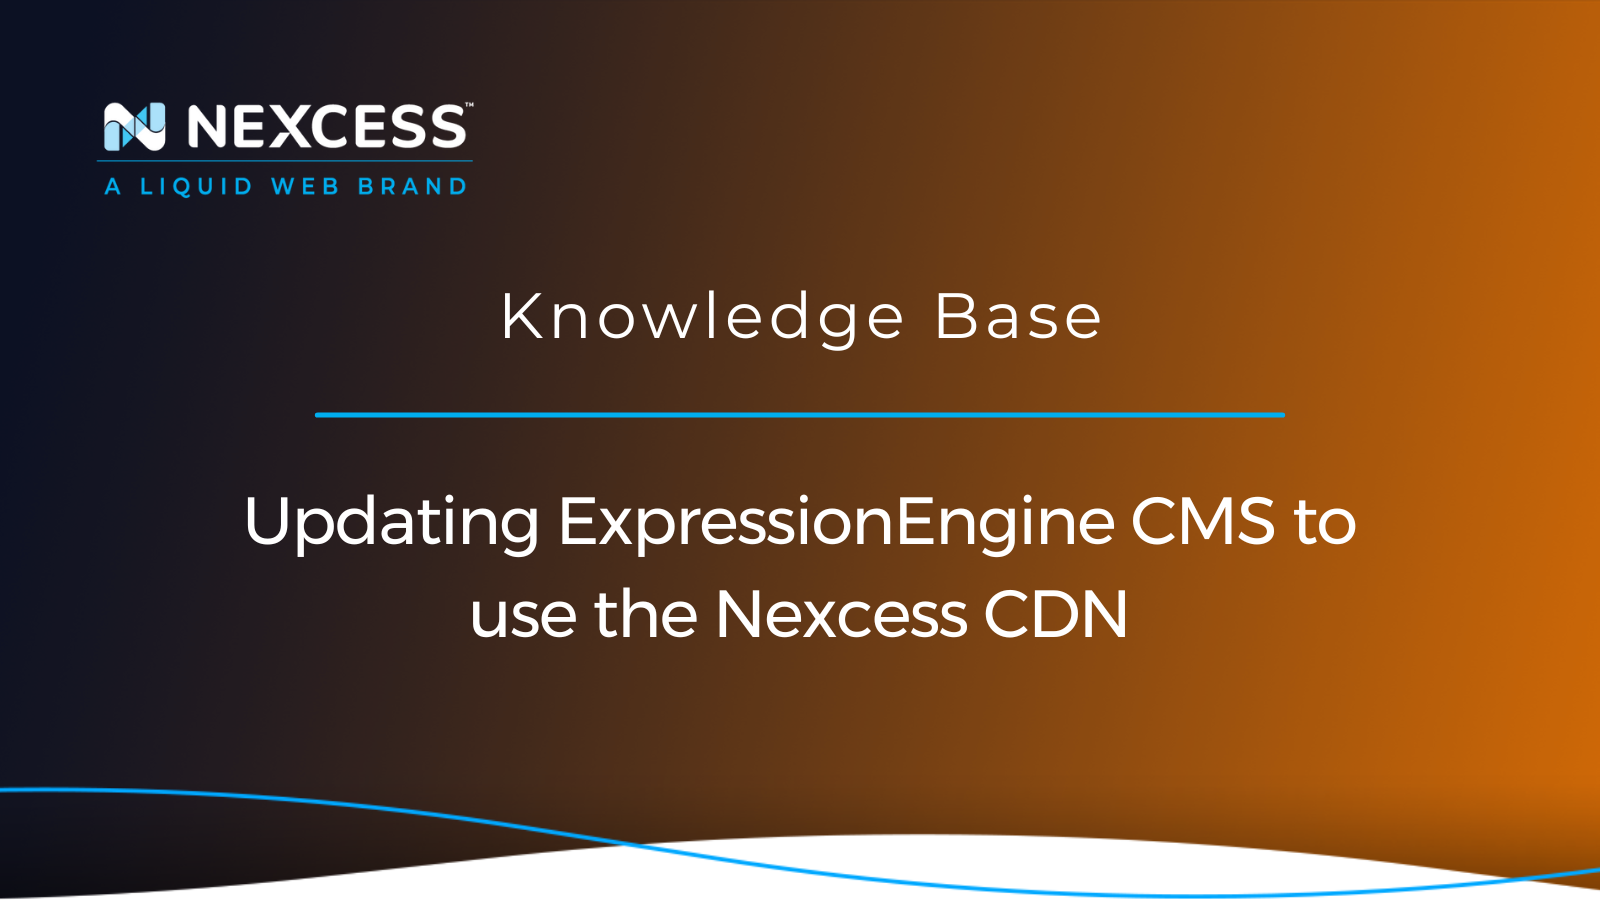 Updating ExpressionEngine CMS to use the Nexcess CDN